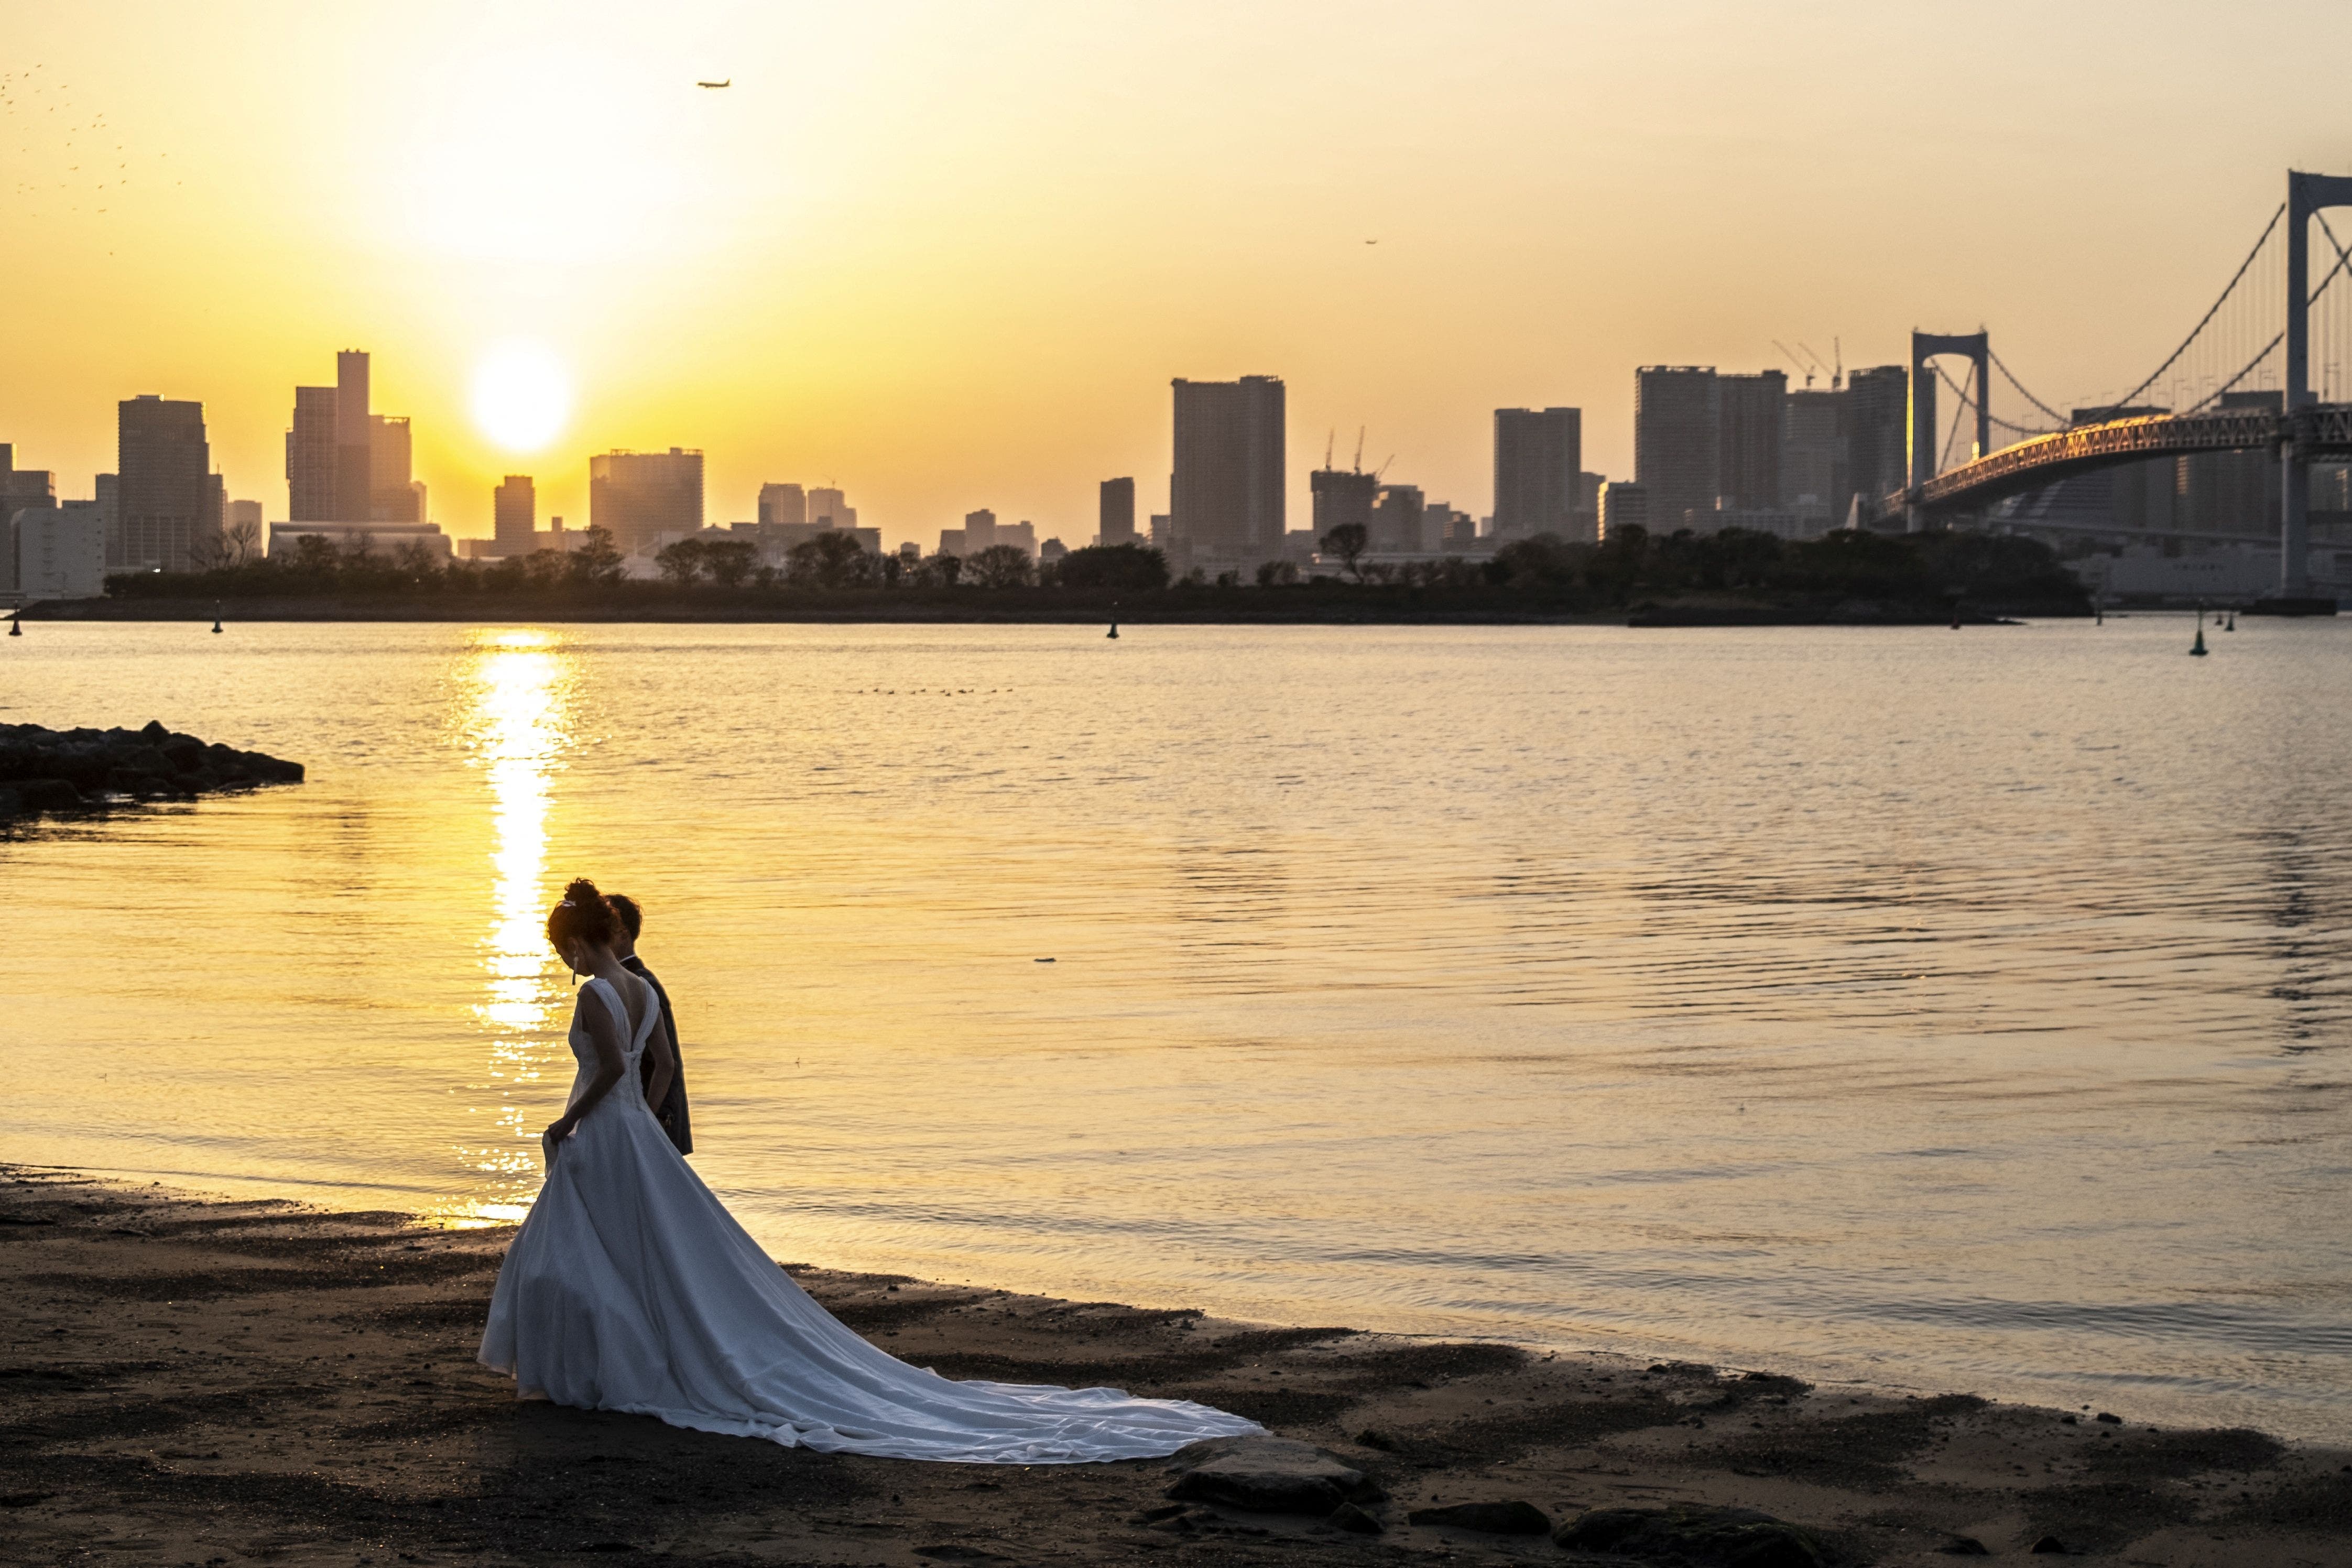 1-in-4 Japanese 30-somethings refuse to get married, government reports